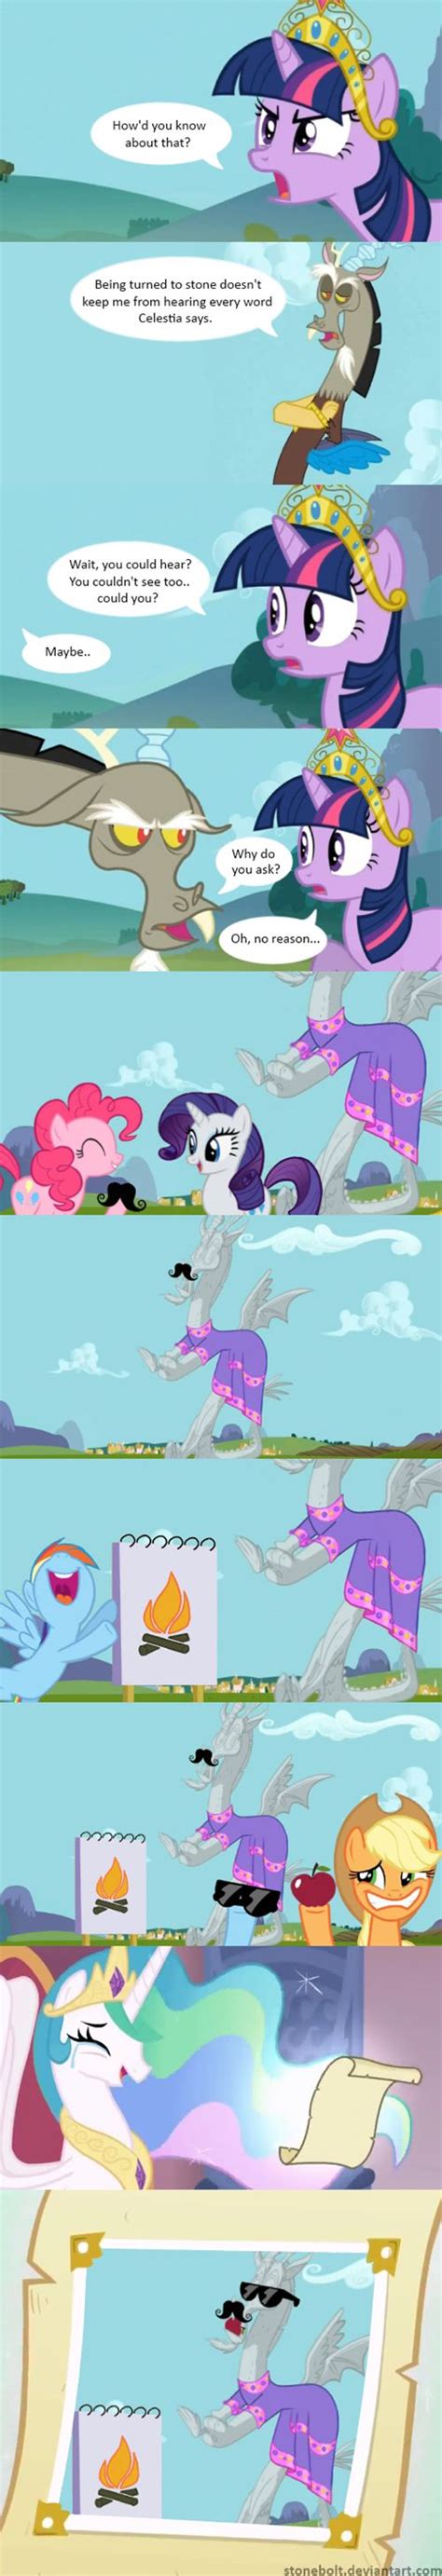 1000 Images About Mlp On Pinterest